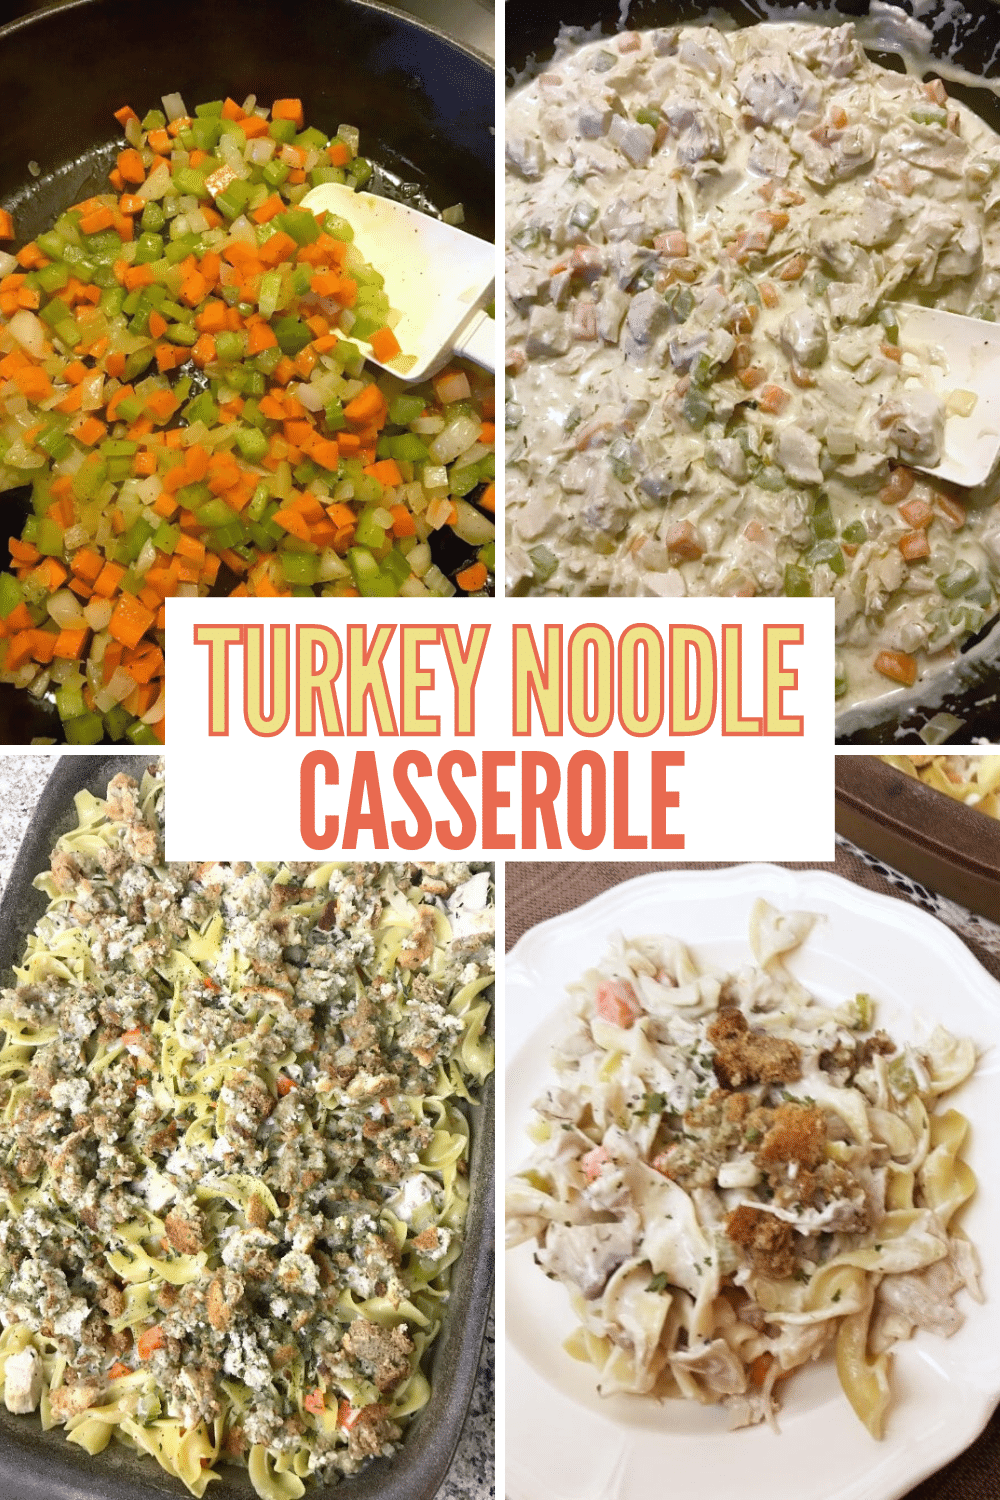 Turkey noodle casserole is a savory and delightful dish that combines tender turkey with cooked noodles and a flavorful sauce. This hearty casserole is perfect for using up leftover turkey and creating a comforting